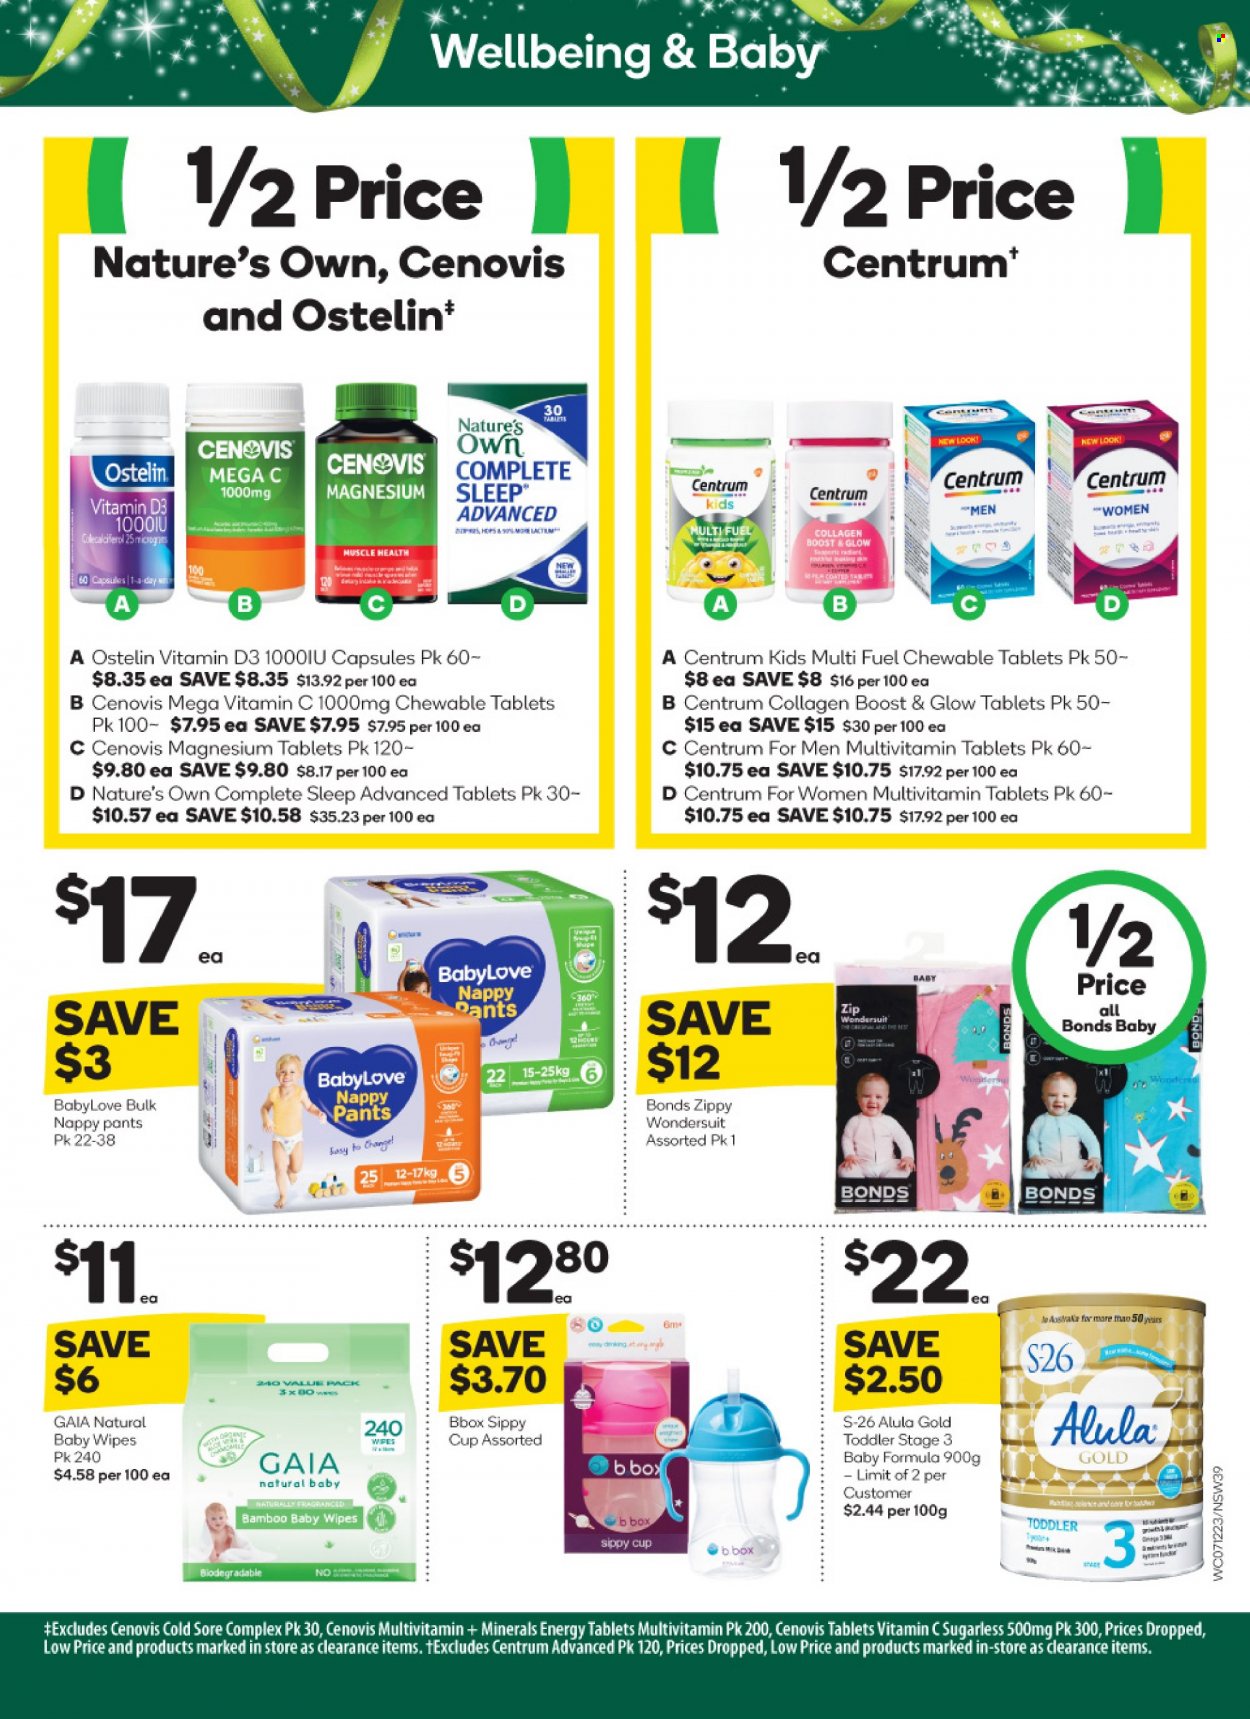 thumbnail - Woolworths Catalogue - 7 Dec 2022 - 13 Dec 2022 - Sales products - Gaia, Boost, wipes, pants, baby wipes, nappies, BabyLove, cup, Bonds, magnesium, multivitamin, vitamin c, Nature's Own, Cenovis, vitamin D3, Centrum, Ostelin. Page 39.